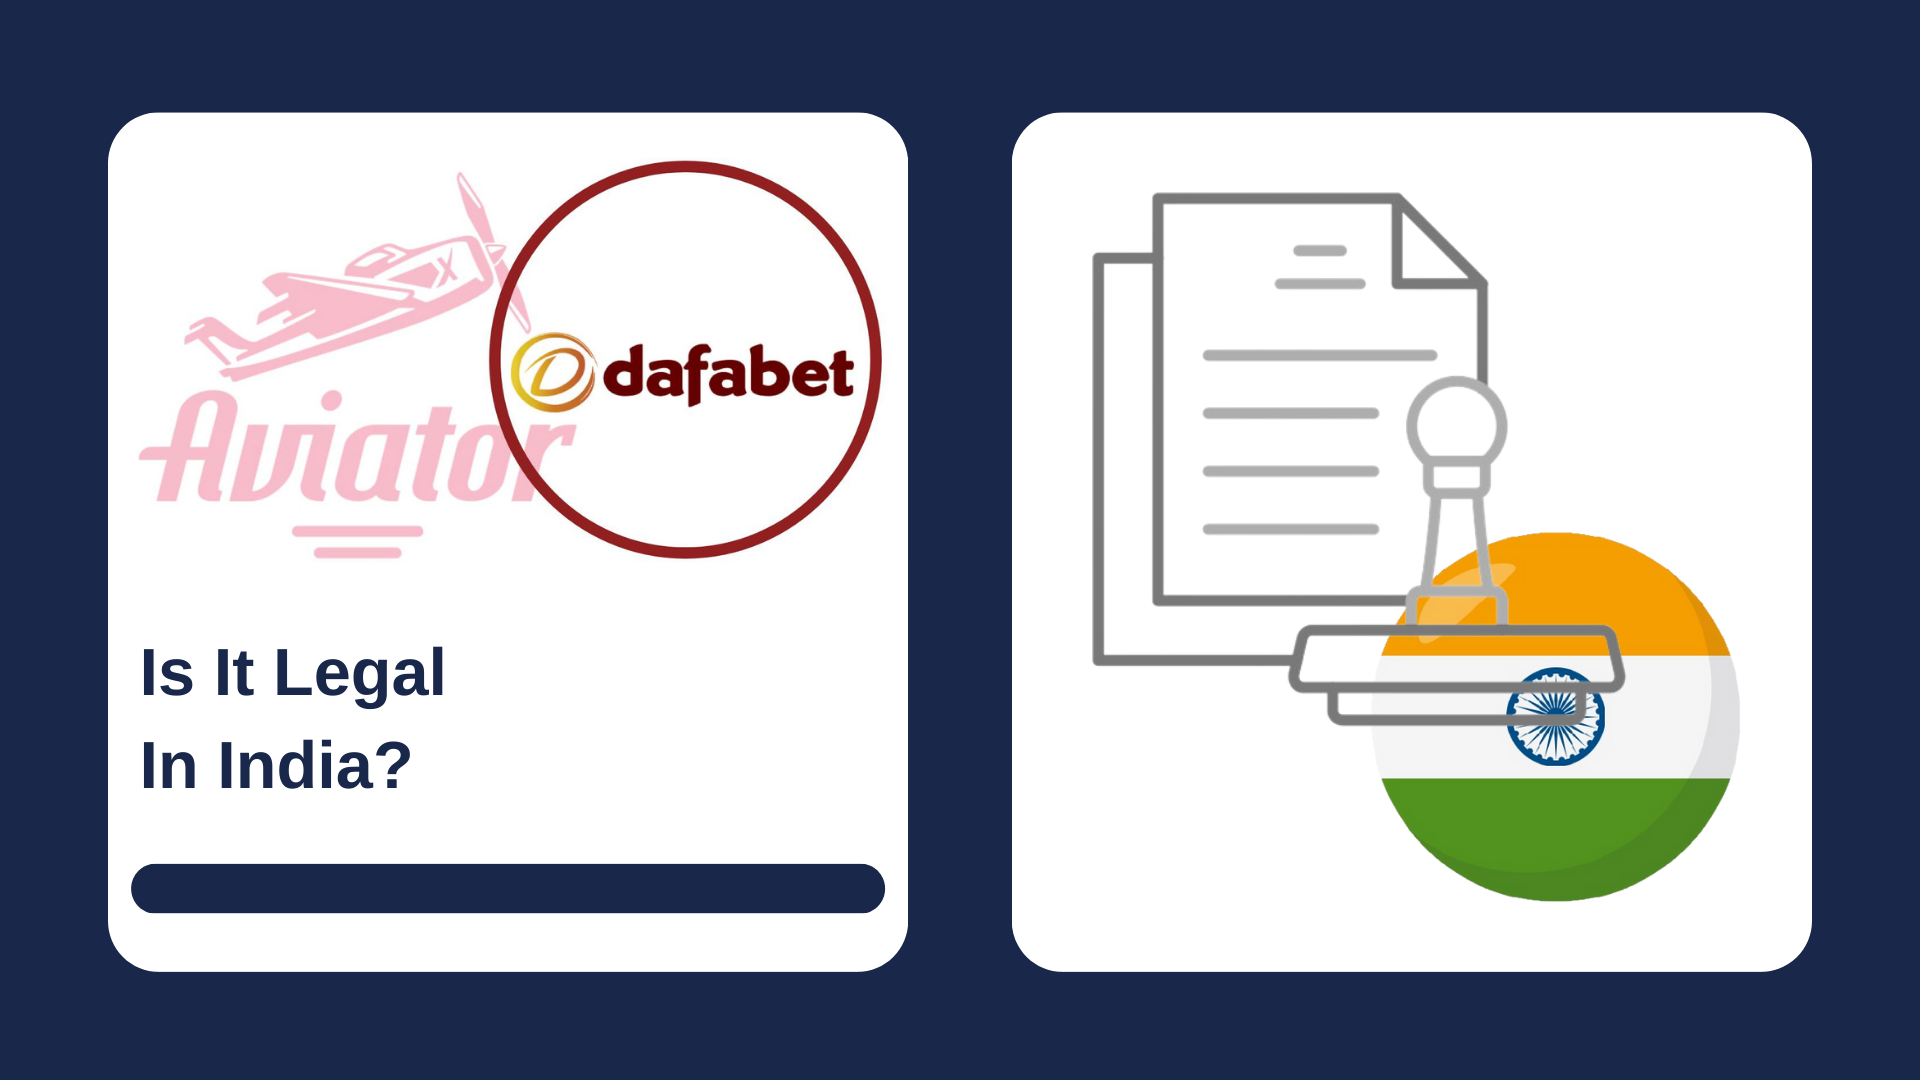 First picture showing Aviator and Dafabet logos, and second - legal documents icon and Indian flag